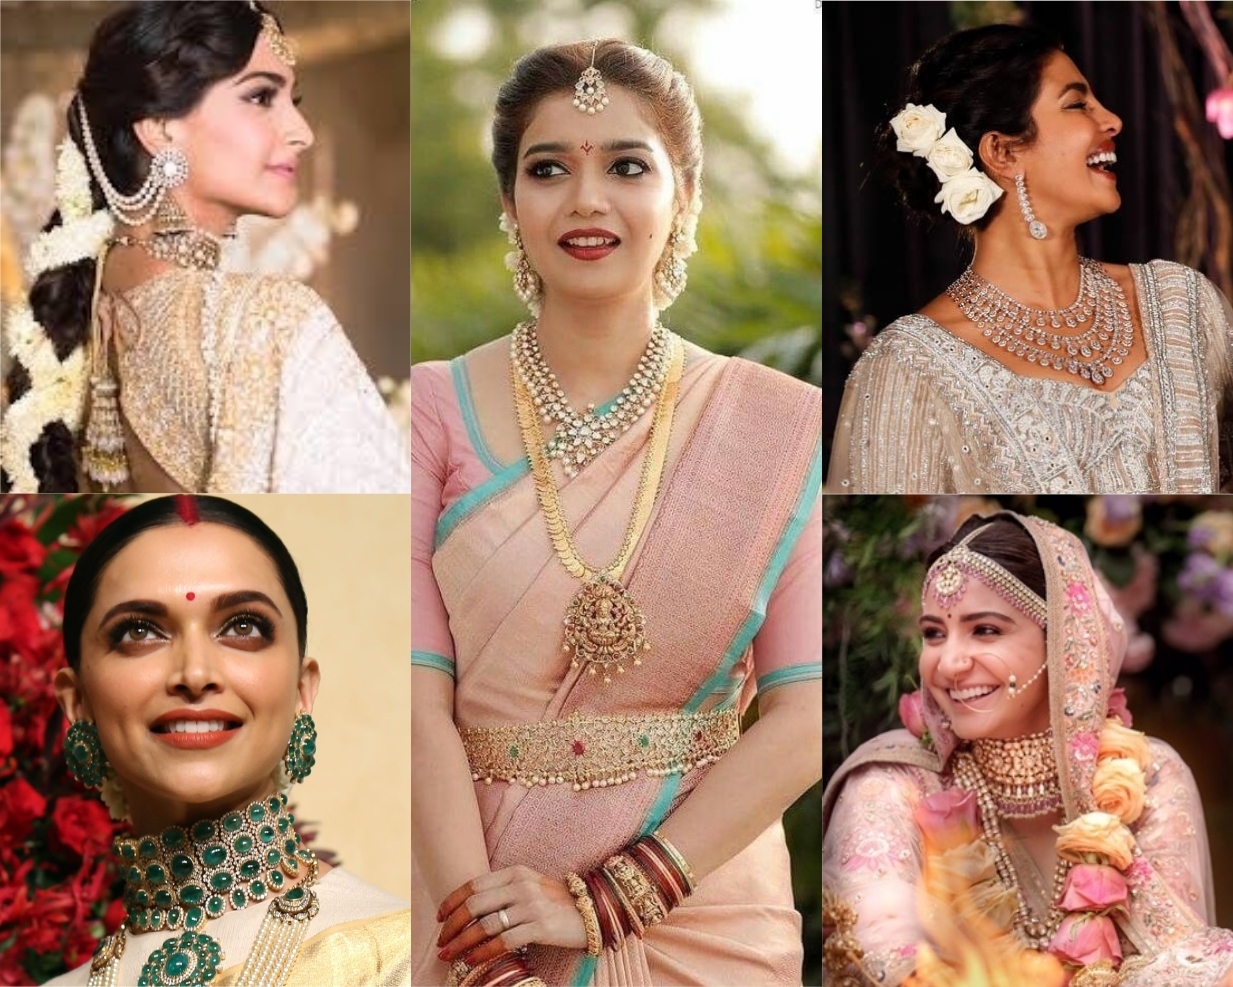 Five Wedding Hairstyles Inspired By Indian Celebrity Brides pertaining to Indian Celebrity Wedding Hairstyles